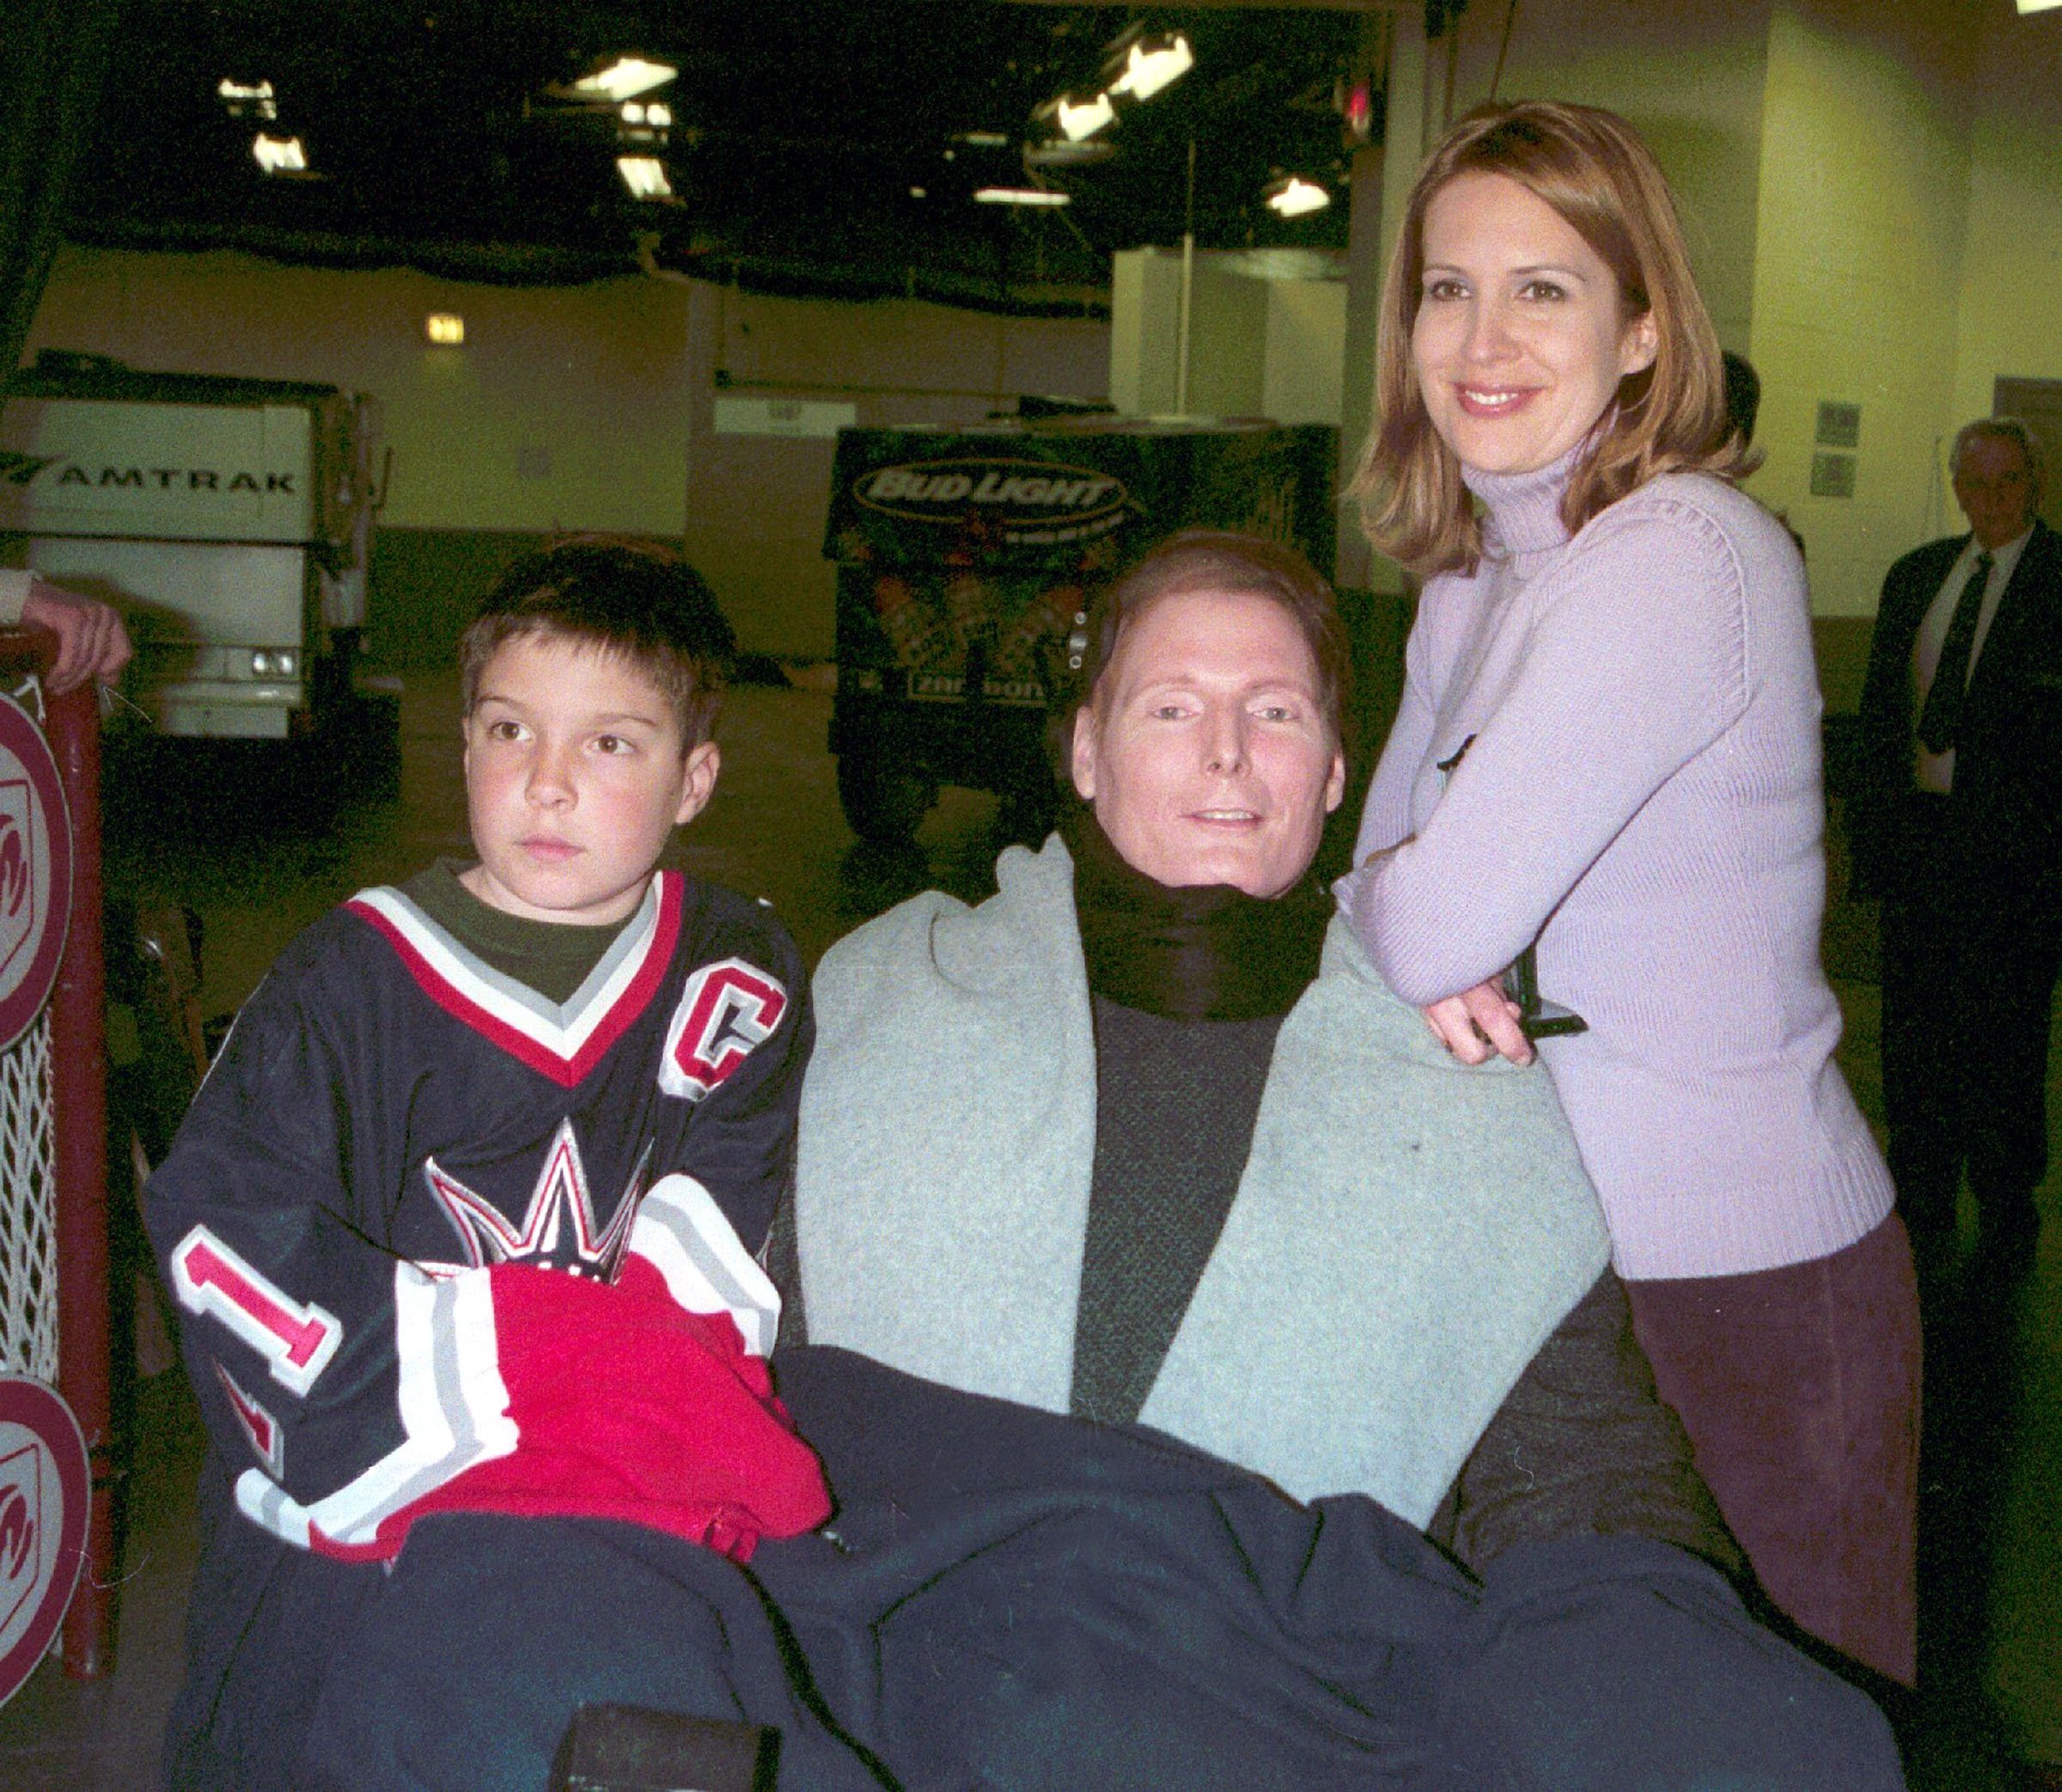 The happy couple and their son at "SuperSkate 2001" on January 7, 2001, at Madison Square Garden in New York City | Source: Getty Images